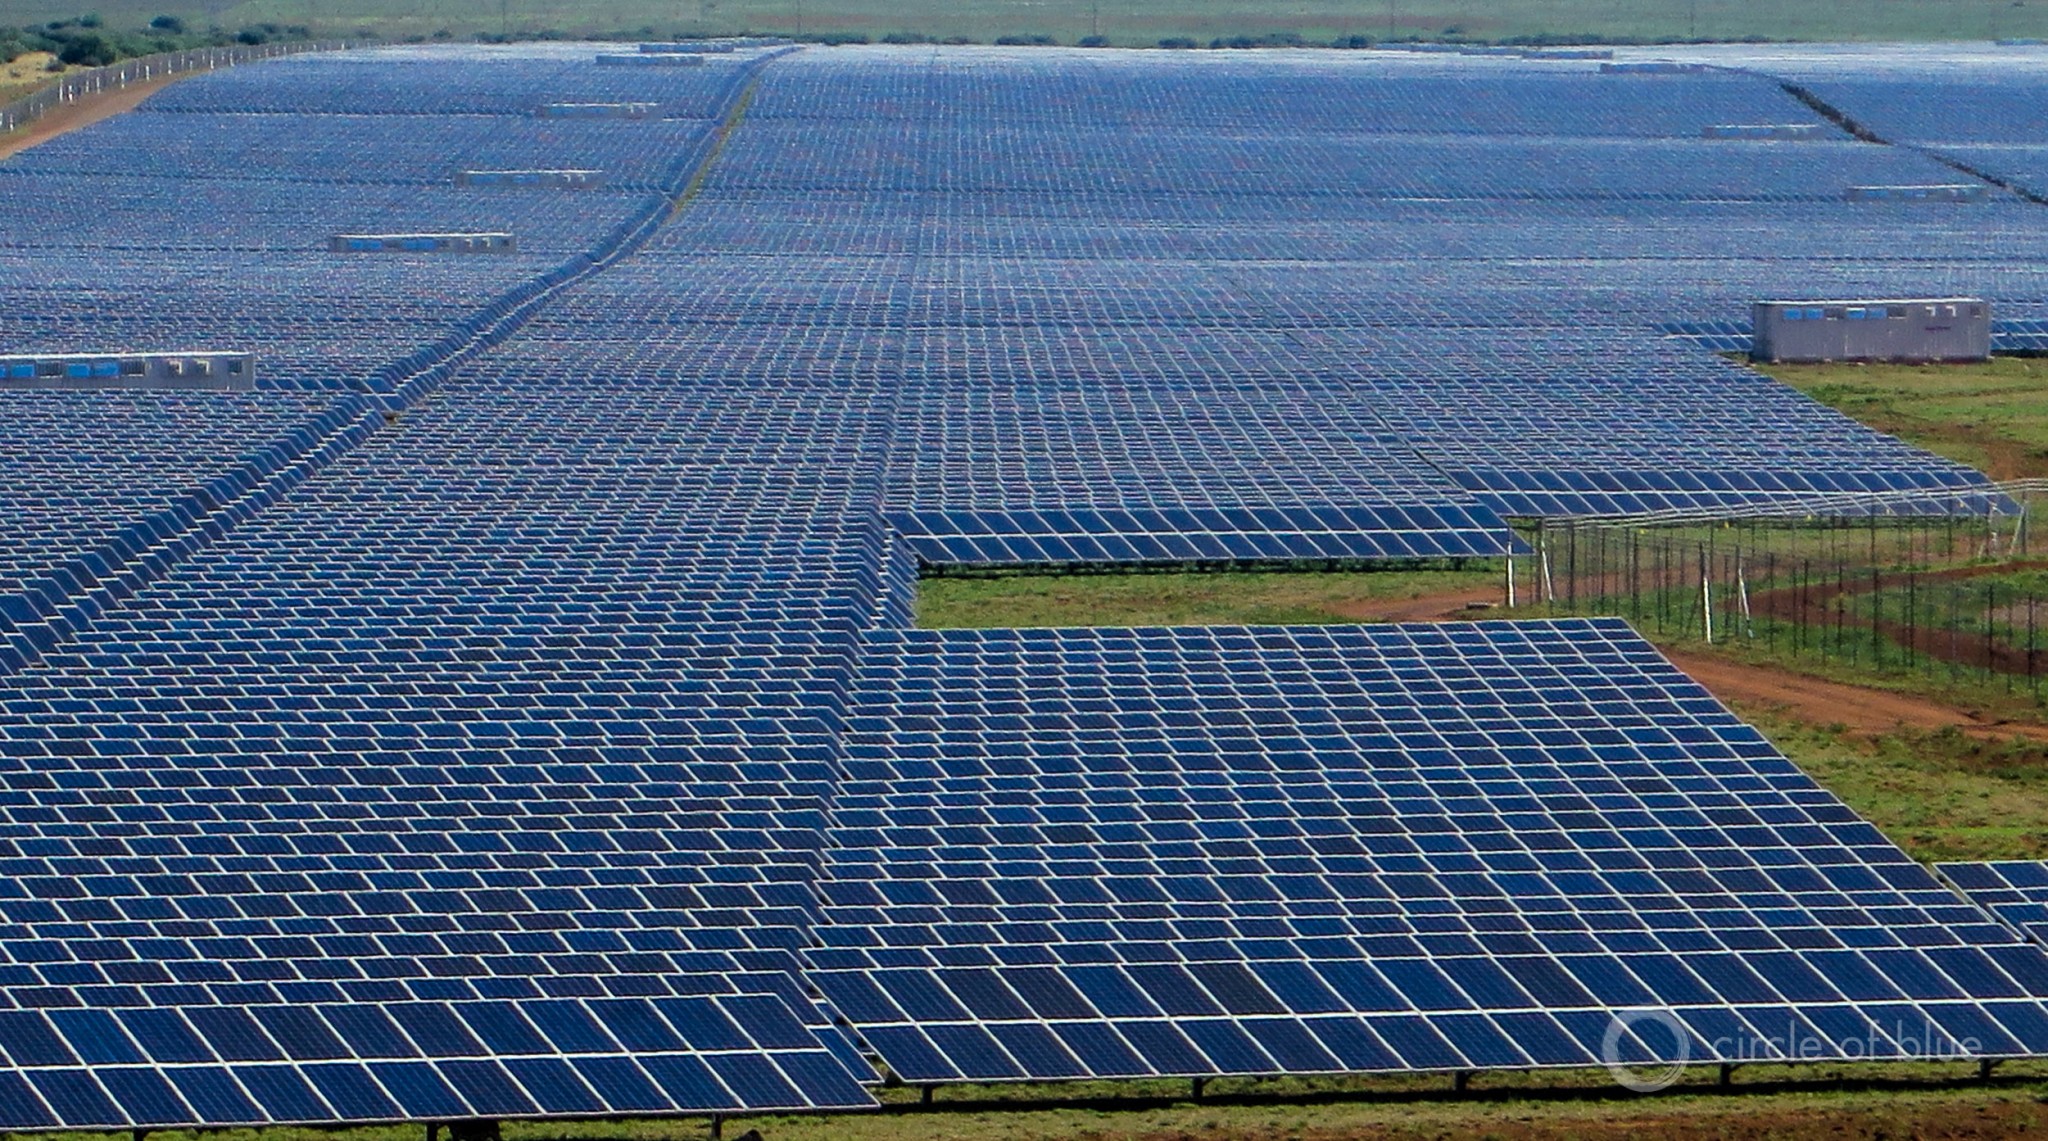 The expanse of electricity generating panels at the Jasper solar photovoltaic power station in the Northern Cape reflects the sun and the sky, and is so large that from a distance it looks like shimmering blue lake. Photo © Keith Schneider / Circle of Blue  